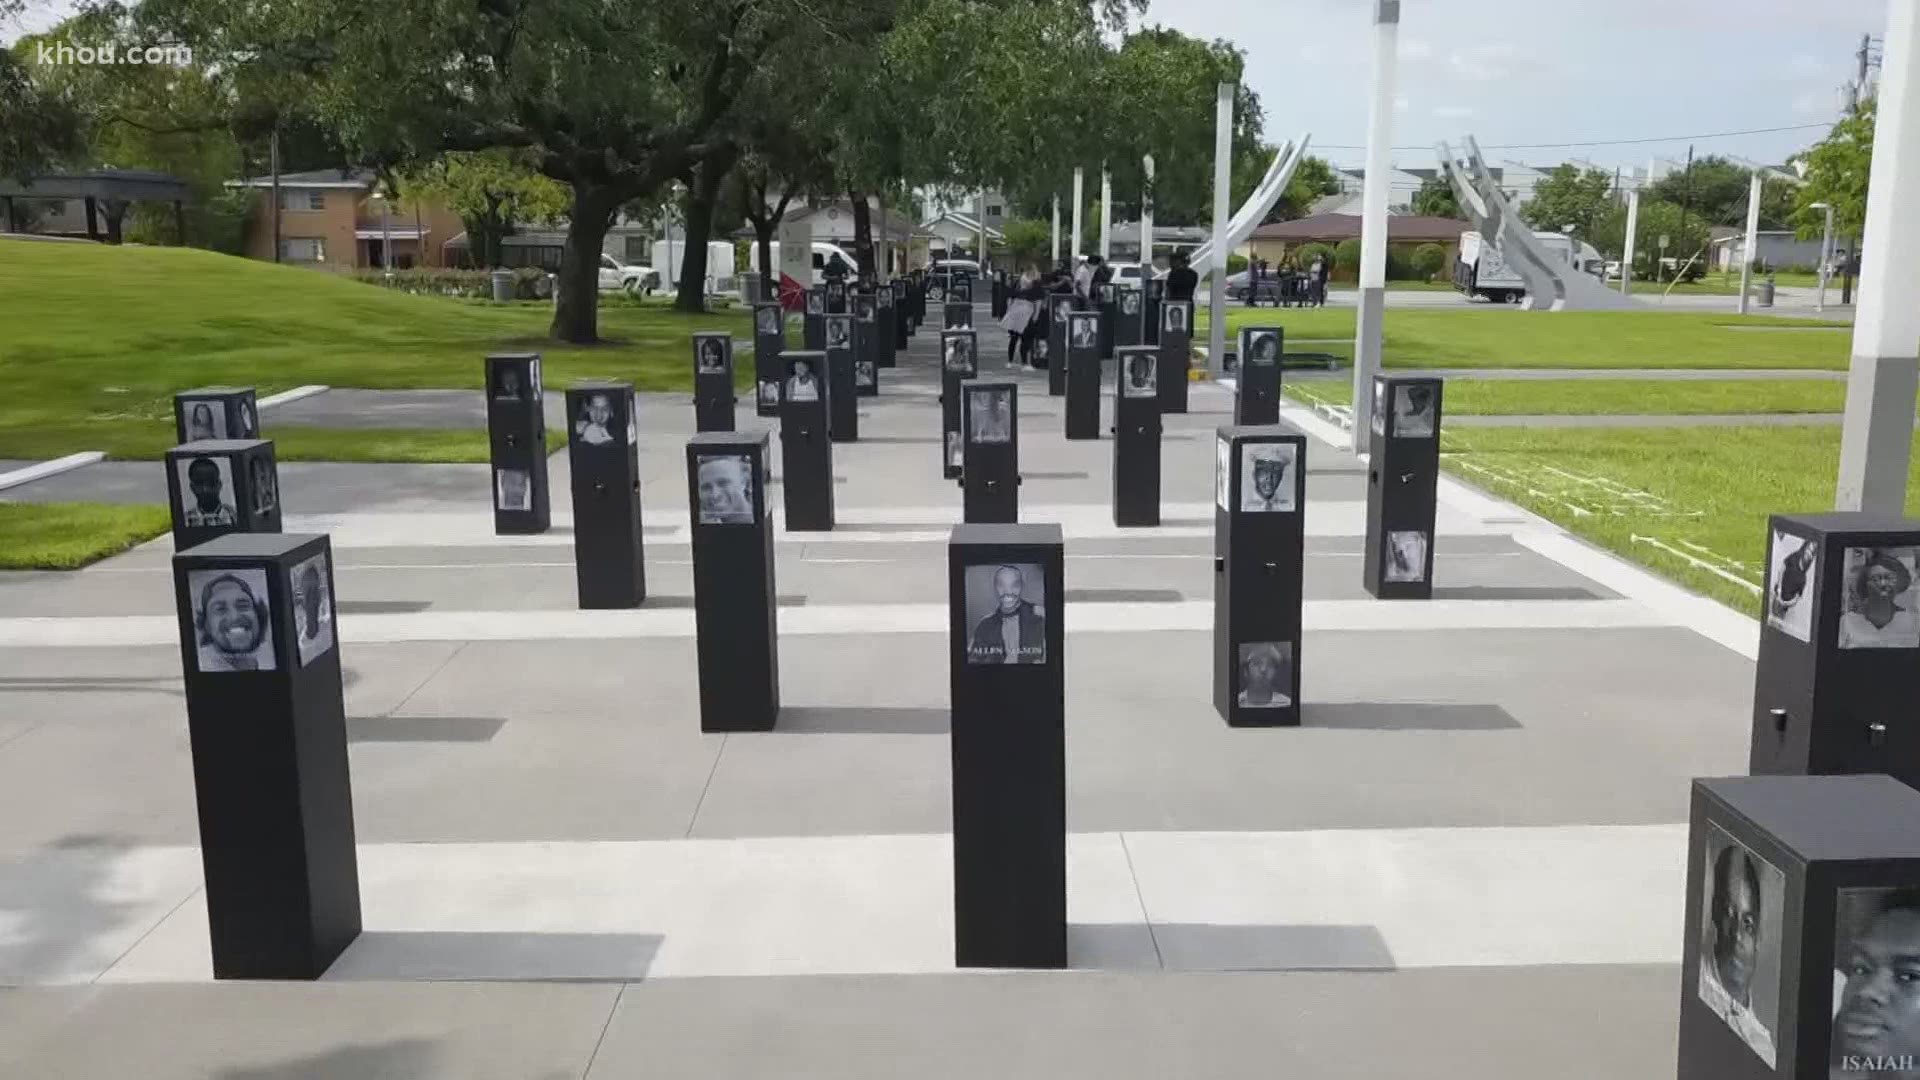 The 'Say Their Names' memorial honors minority Americans who have lost their lives to injustice and police brutality.